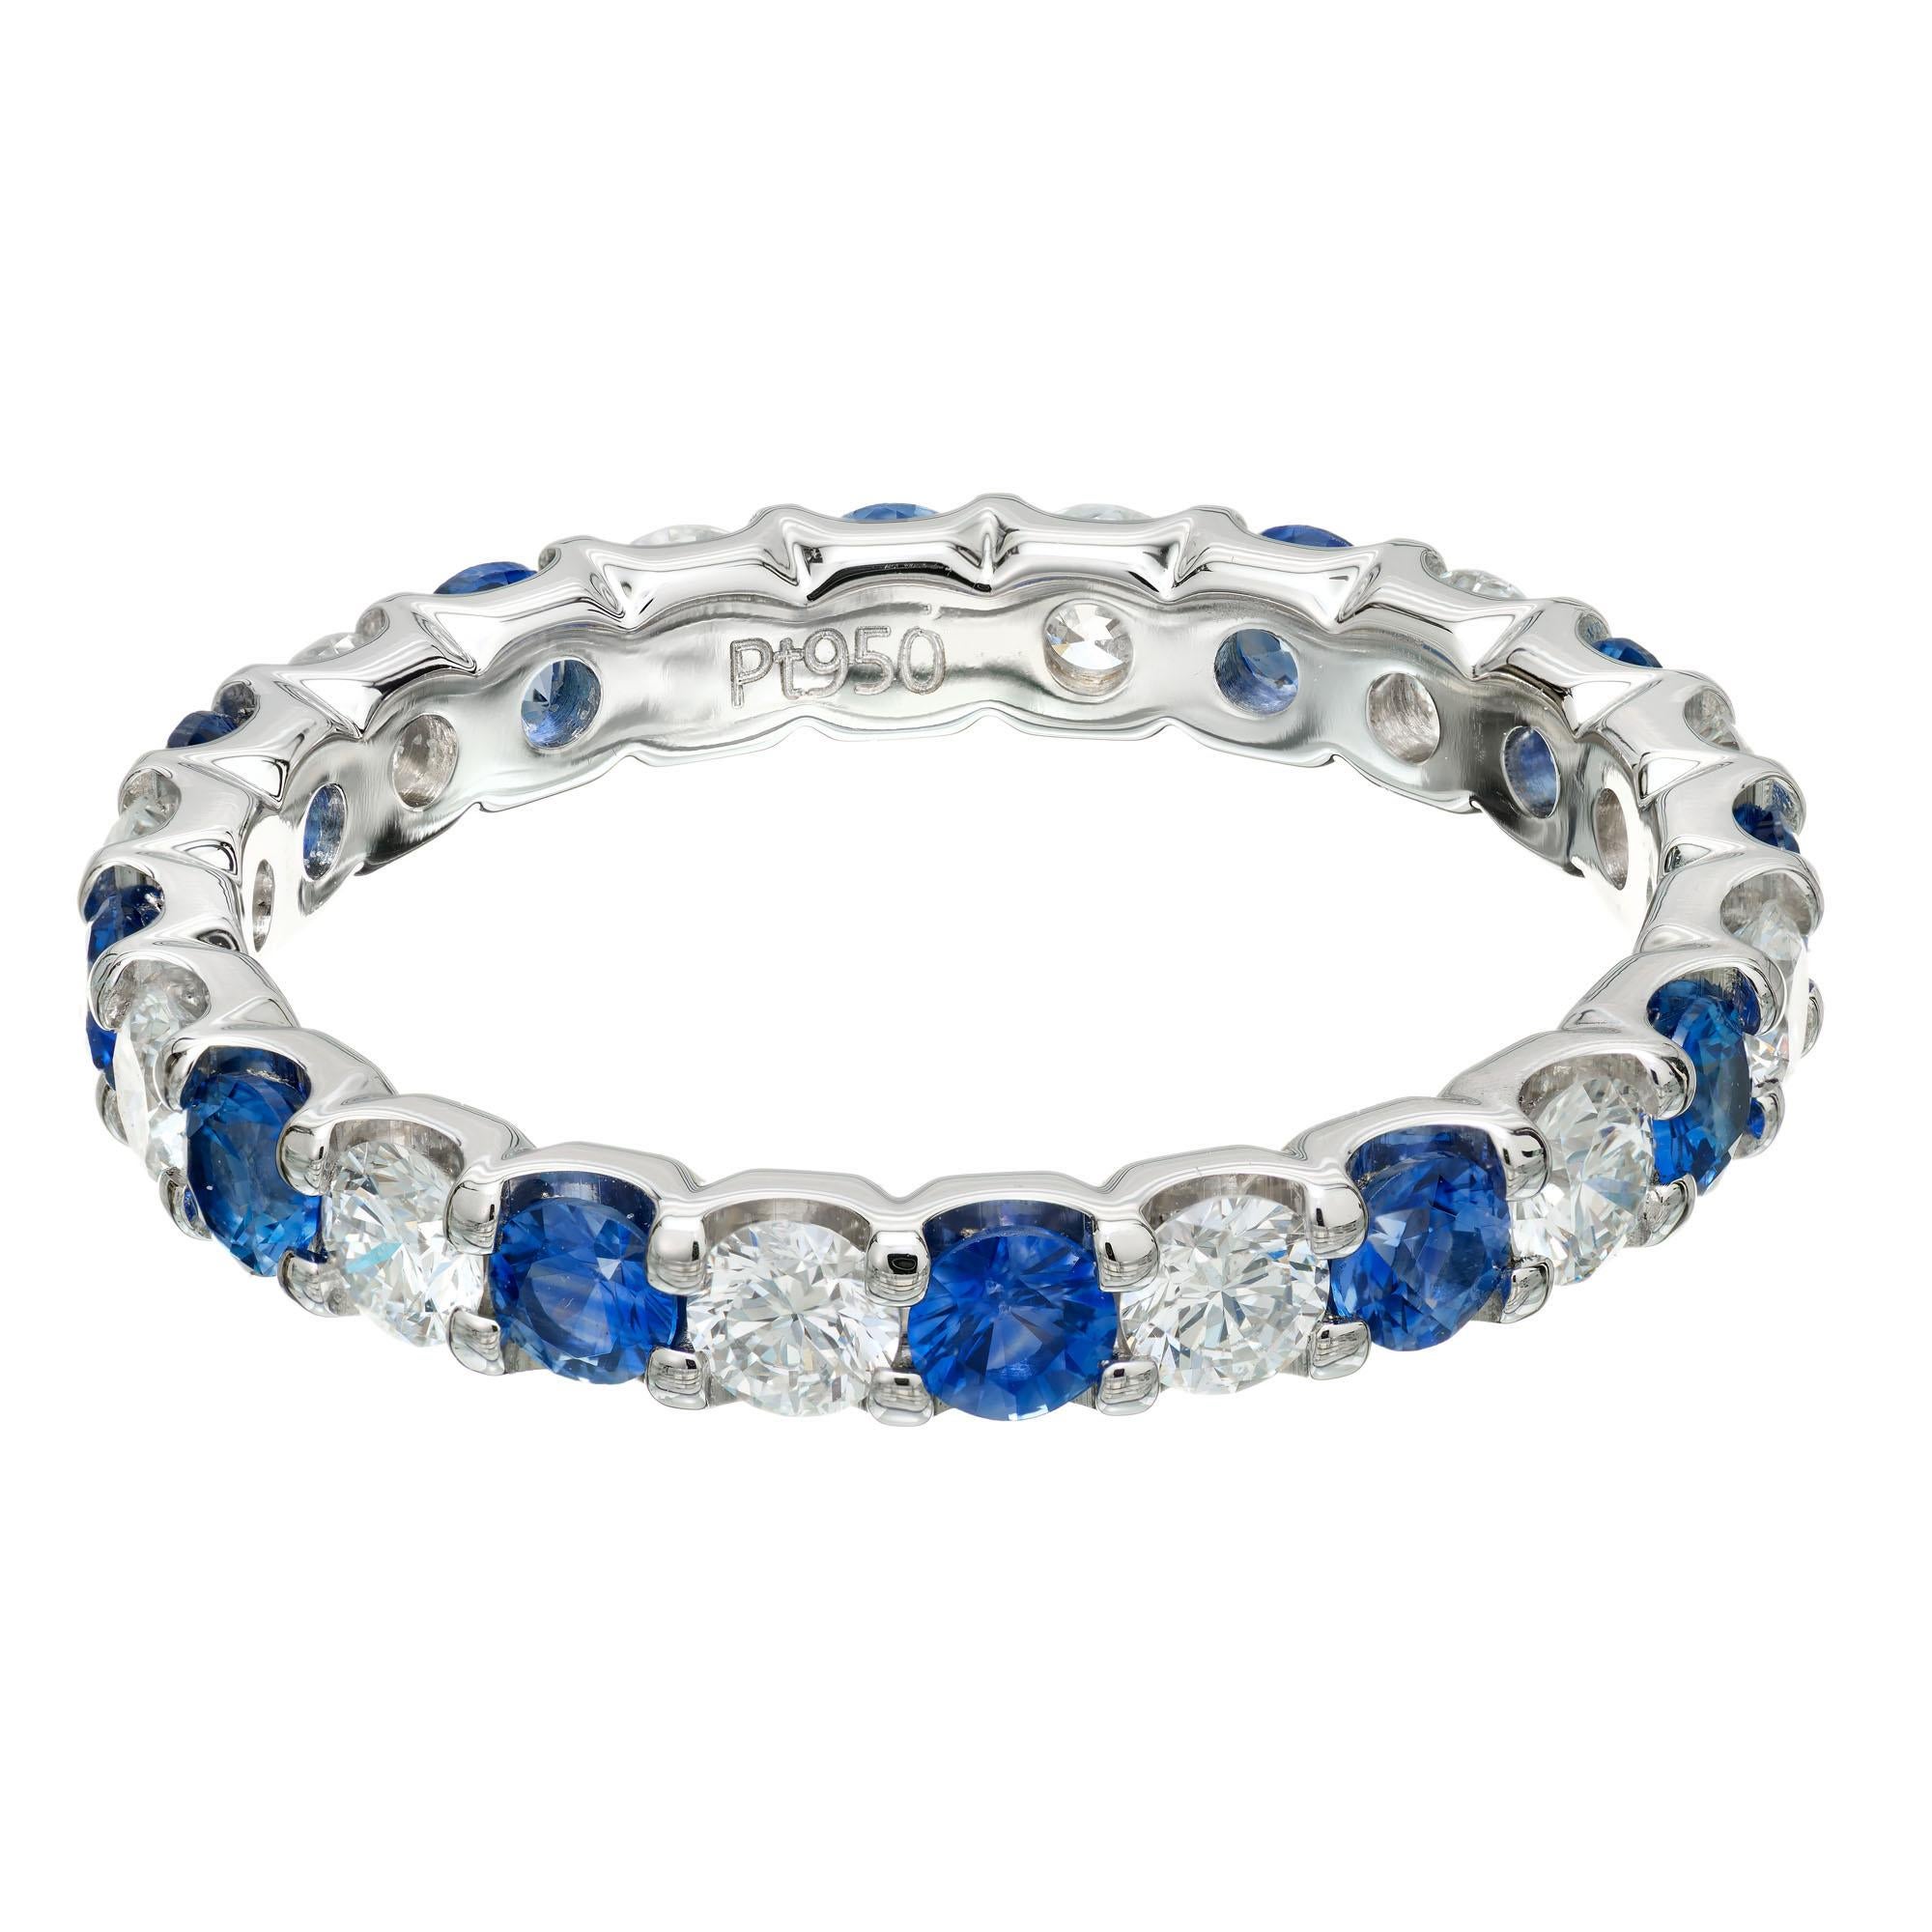 Blue Ceylon sapphire and Ideal cut diamond eternity wedding band ring. 12 round sapphires and 12 round diamonds in a low set common prong setting. Designed and crafted in the Peter Suchy workshop. May be ordered in any stone or ring size

12 round